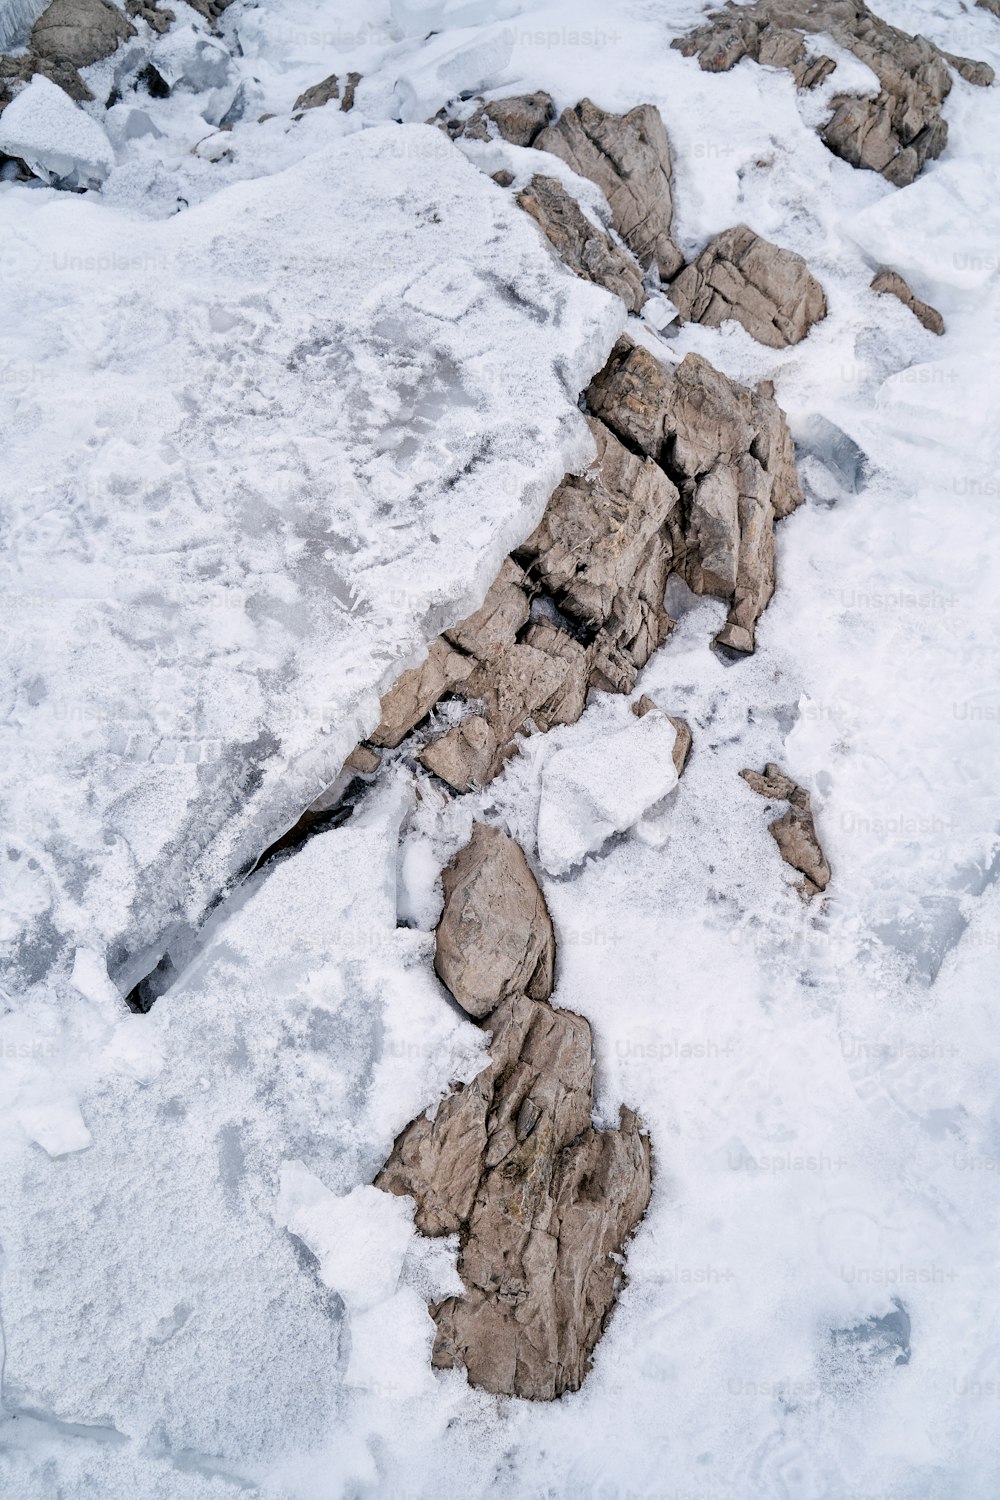 a snow covered area with rocks and snow